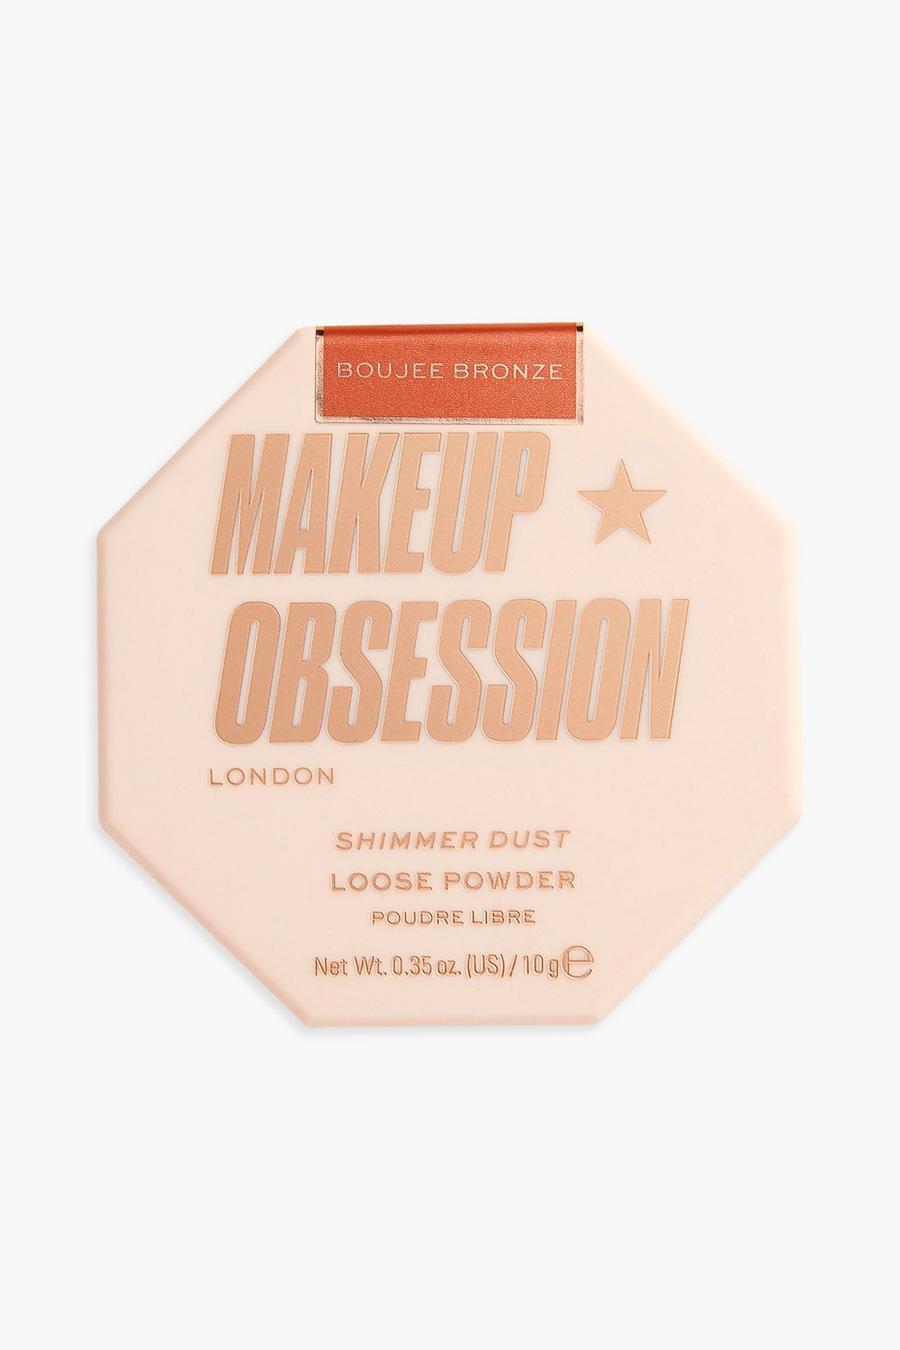 Multi Makeup Obsession Shimmer Dust Boujee Bronze